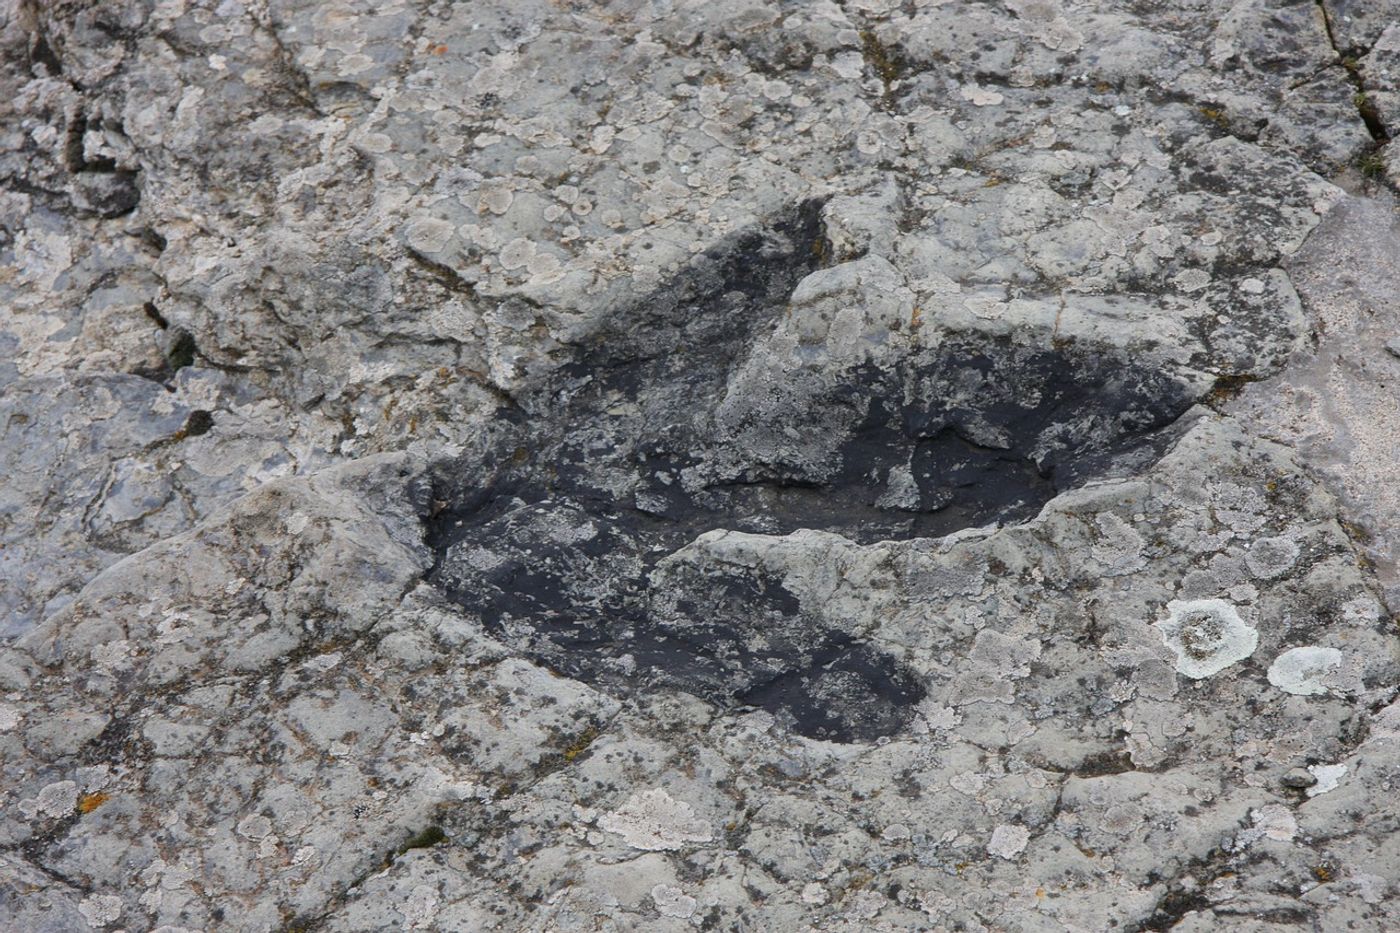 A dinosaur footprint, not associated with this study.